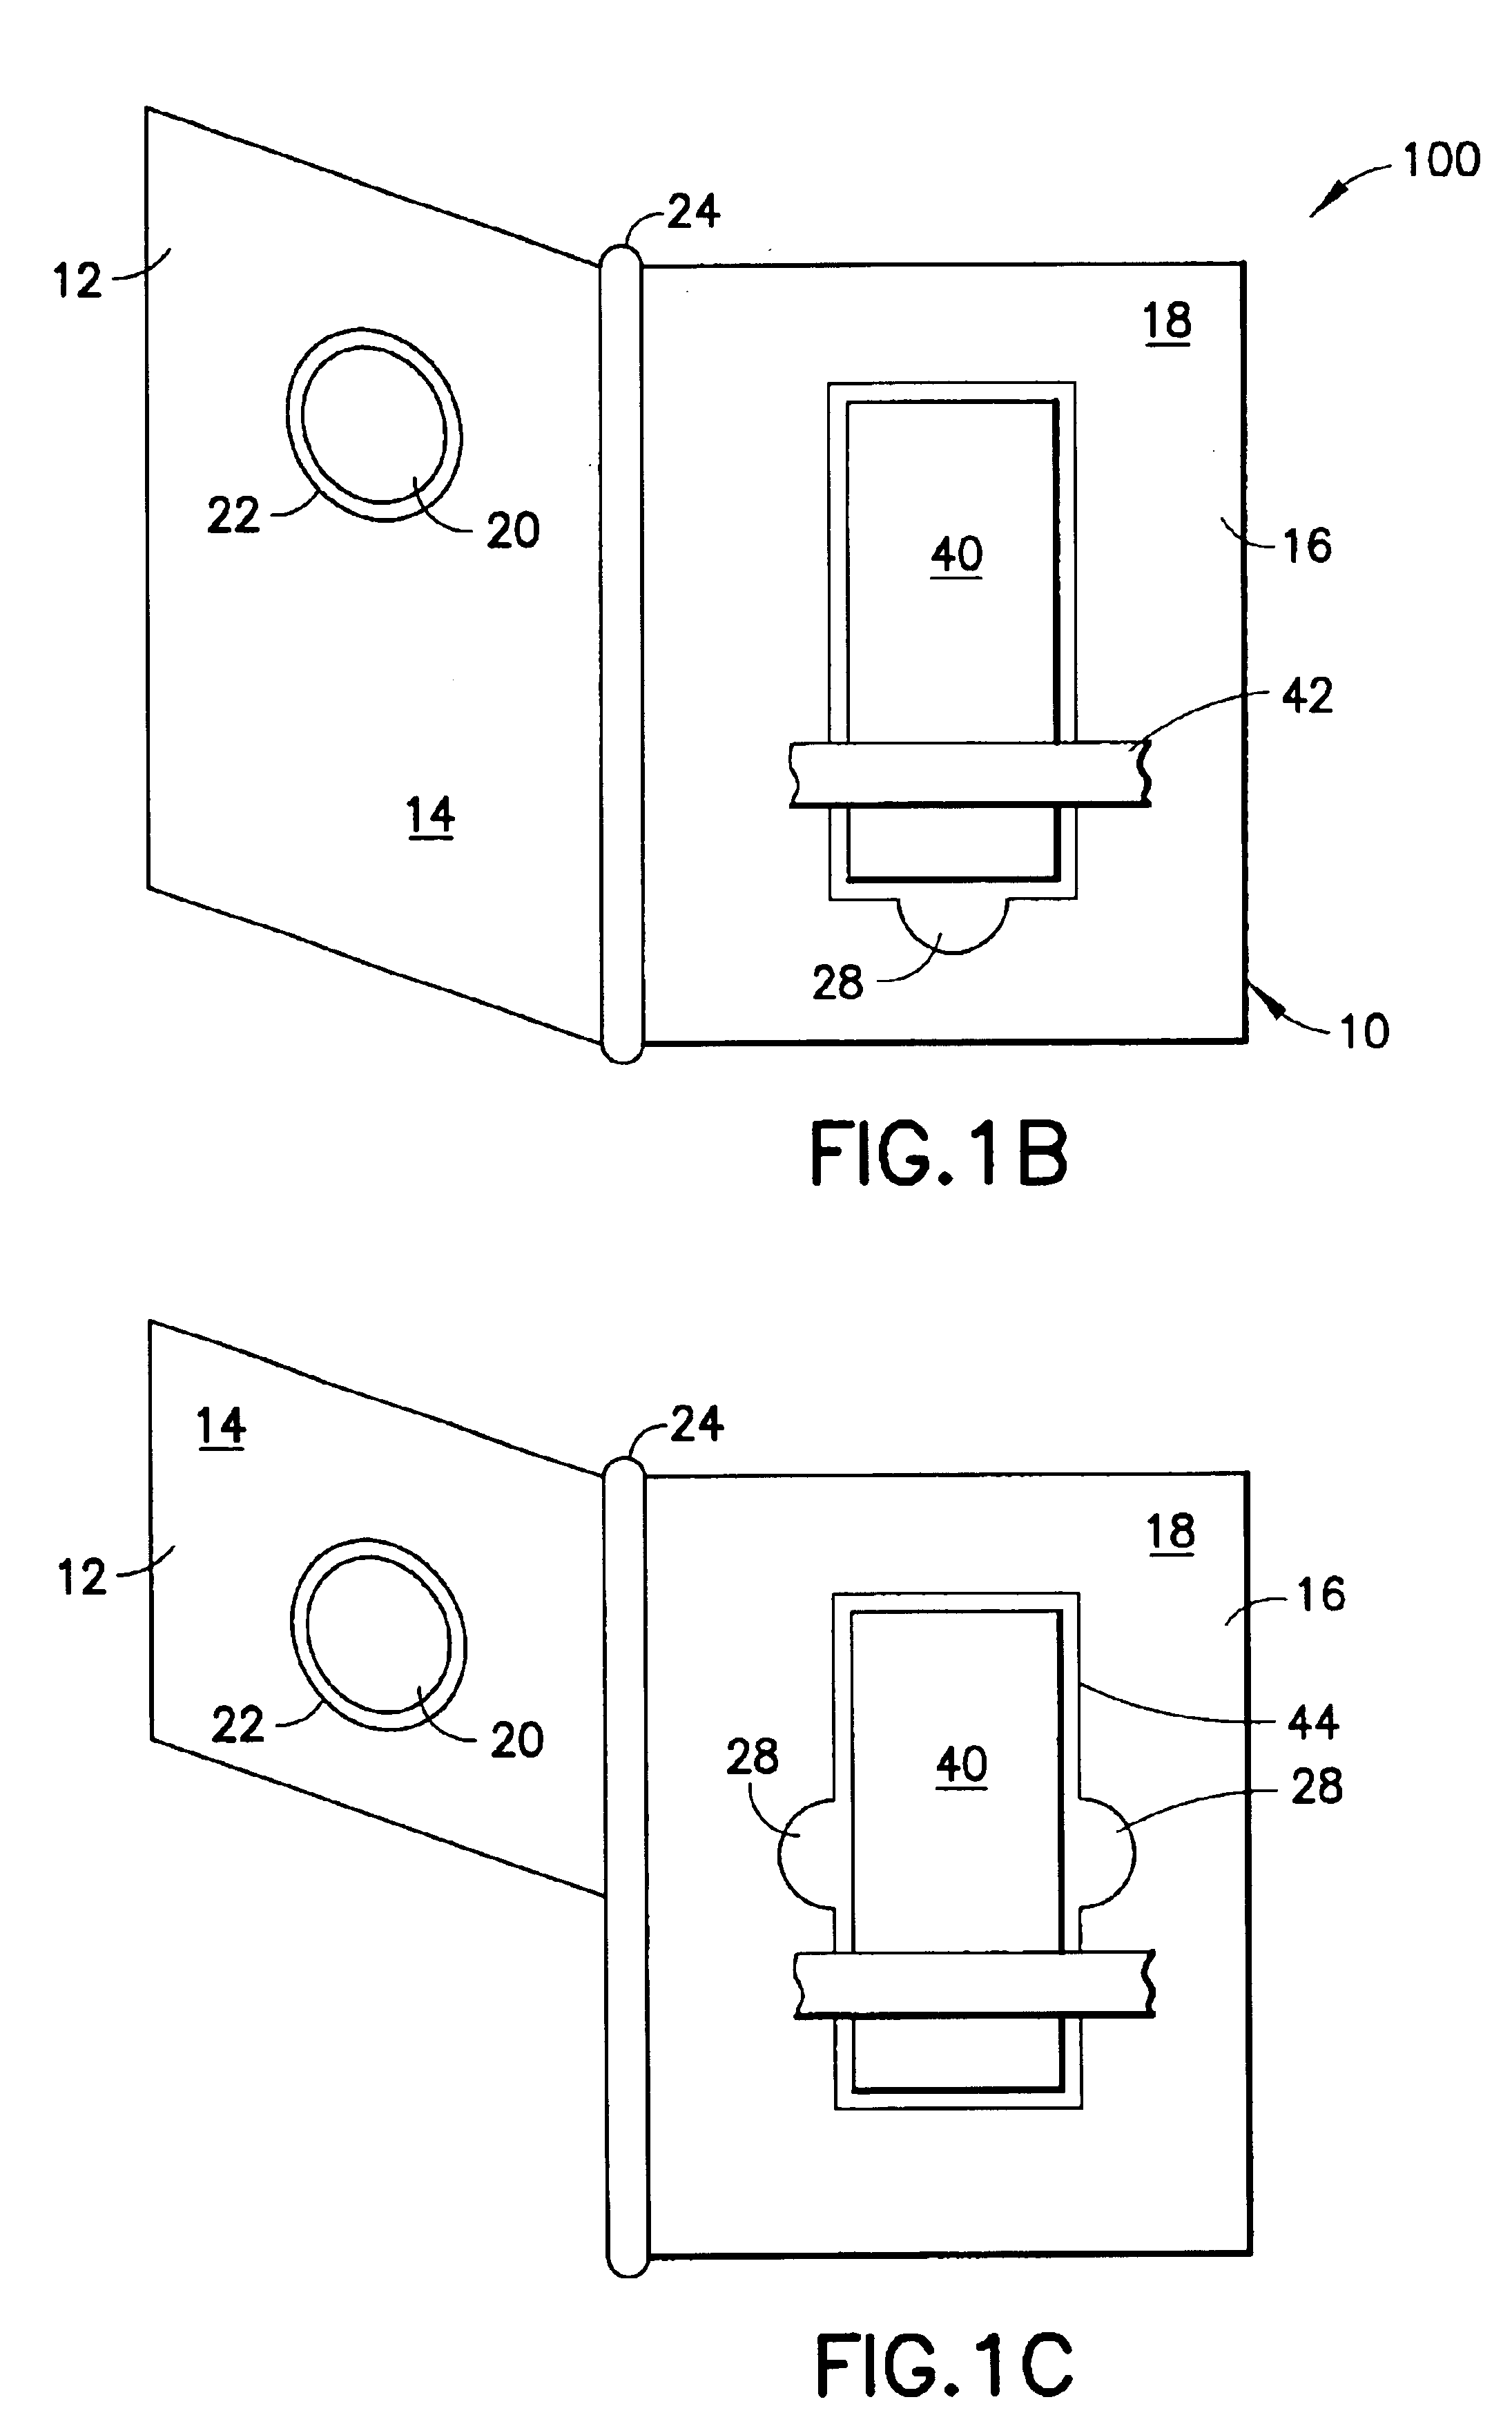 Device and method for cytology slide preparation